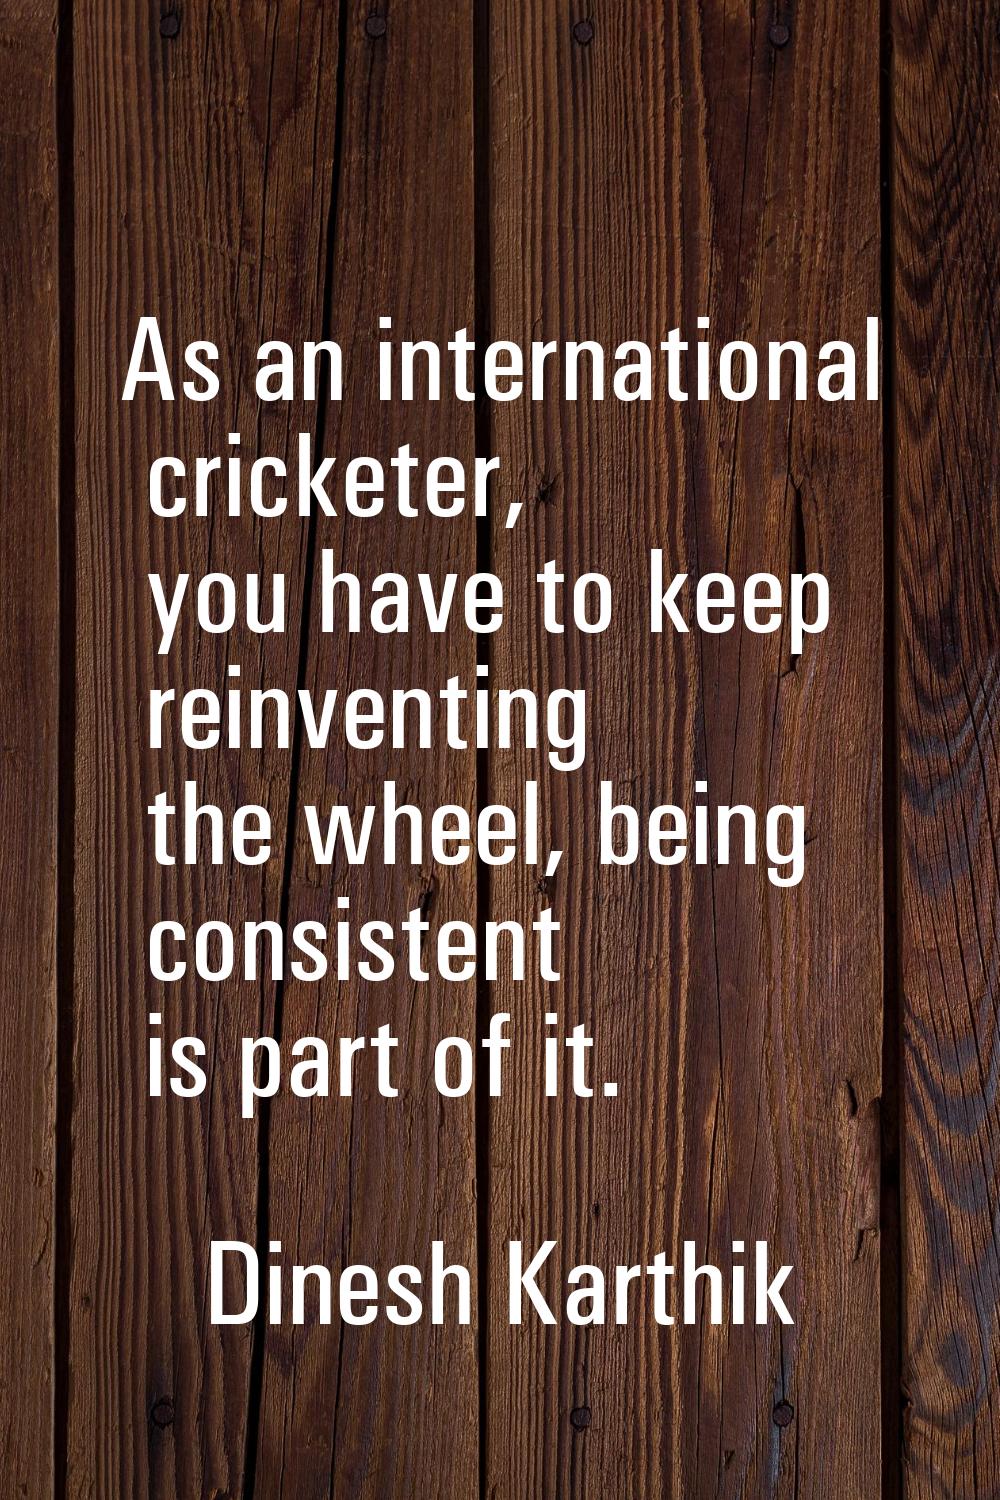 As an international cricketer, you have to keep reinventing the wheel, being consistent is part of 